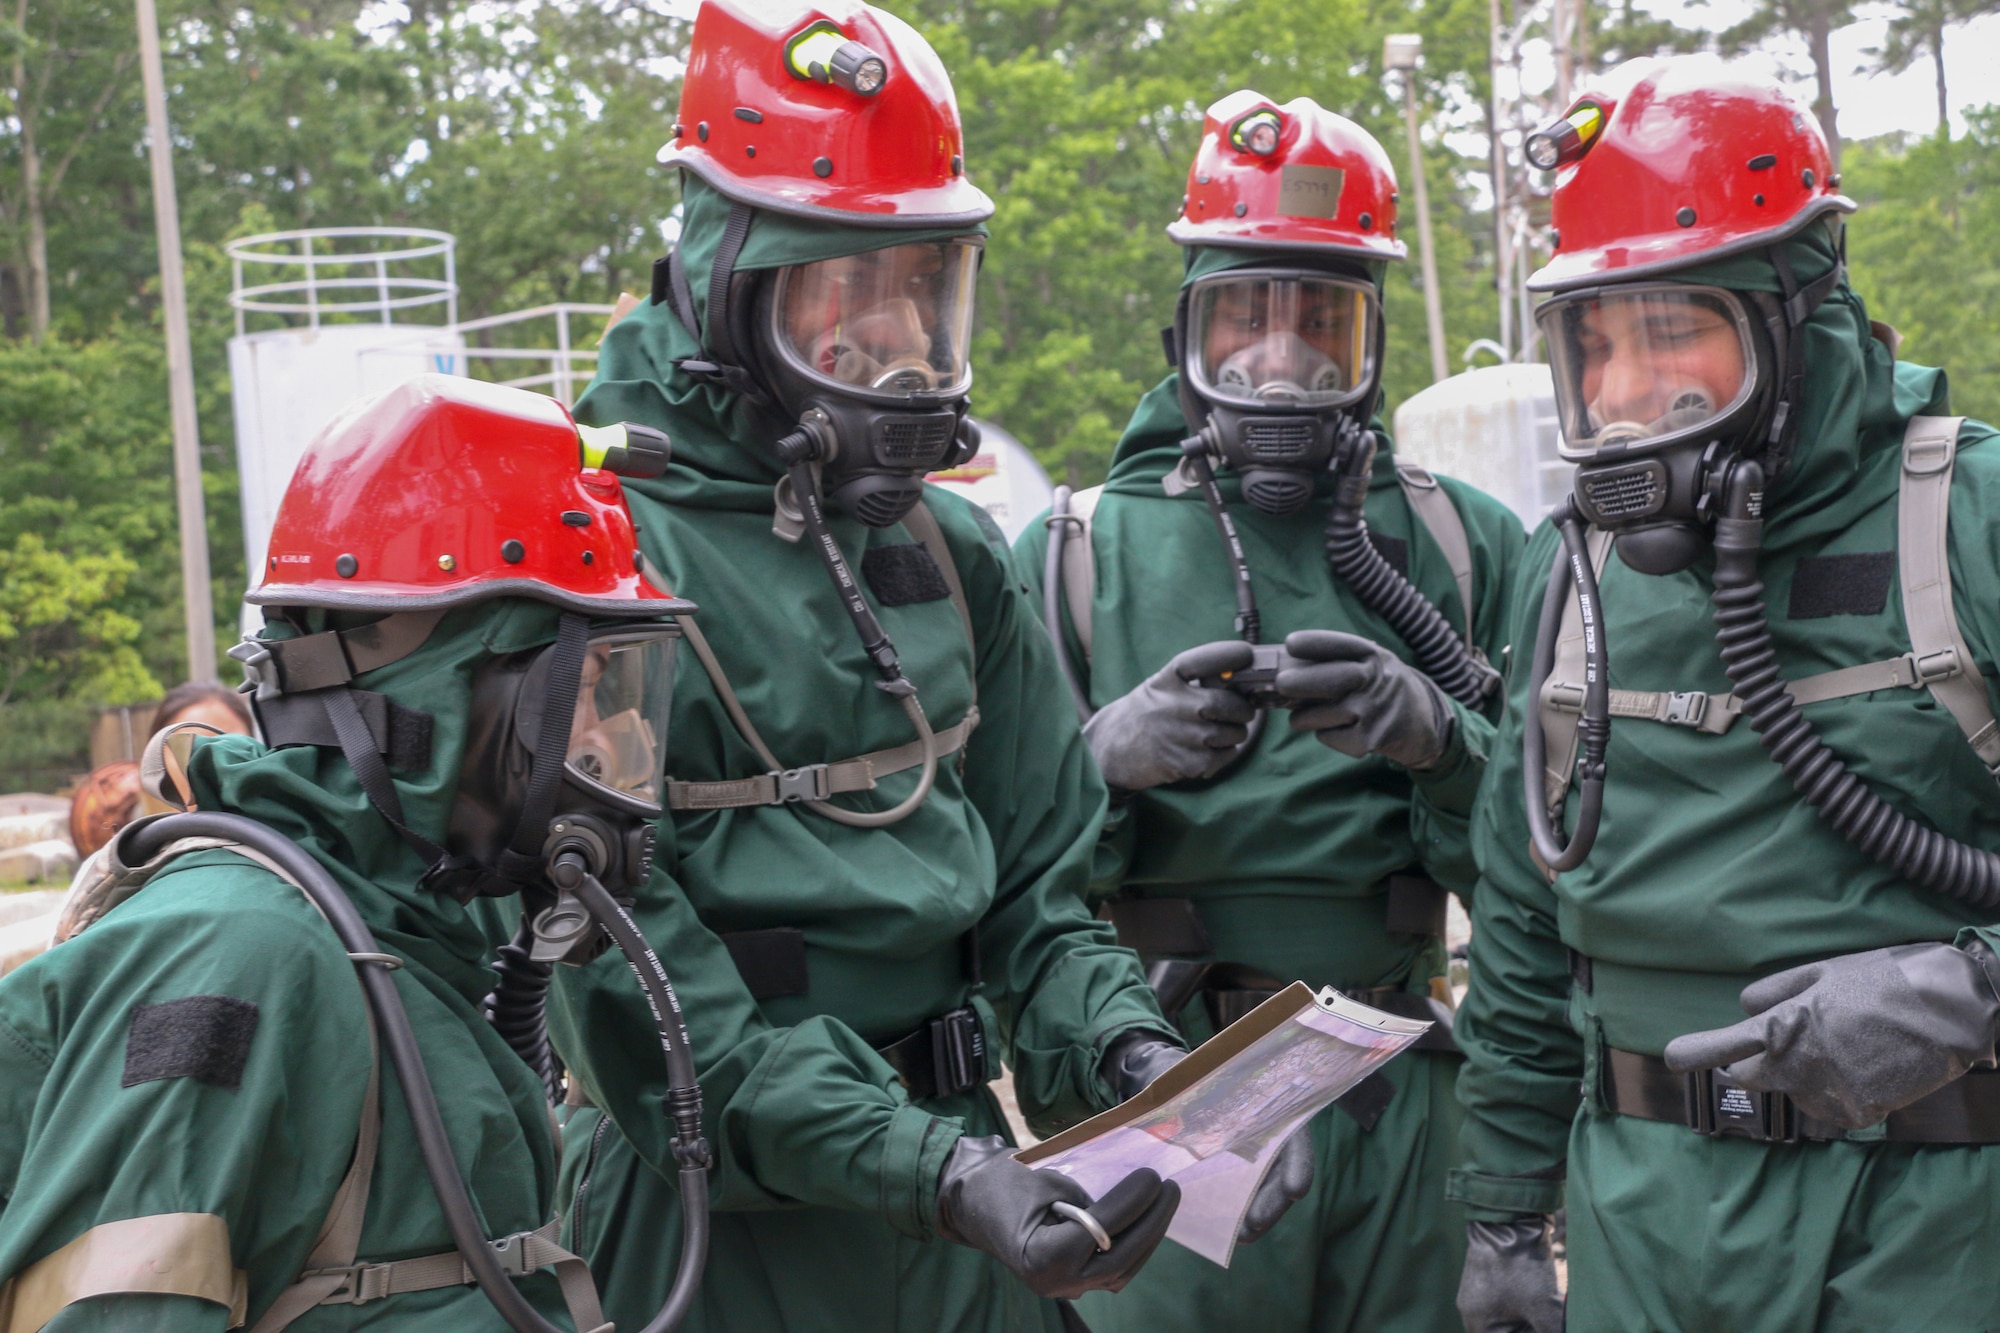 Members of the 113th Force Support Squadron, District of Columbia Air National Guard review a grid map before search and extraction during a mass casualty and CBRNE response training exercise at Virginia Beach Fire Training Center, May 21, 2023. Eleven members of FSS comprise a nationally-certified Fatality Search and Recovery Team (FSRT) responsible for urban search and rescue, mass casualty decontamination, and other federal and state disaster response. (National Guard photo by A.J. Coyne)